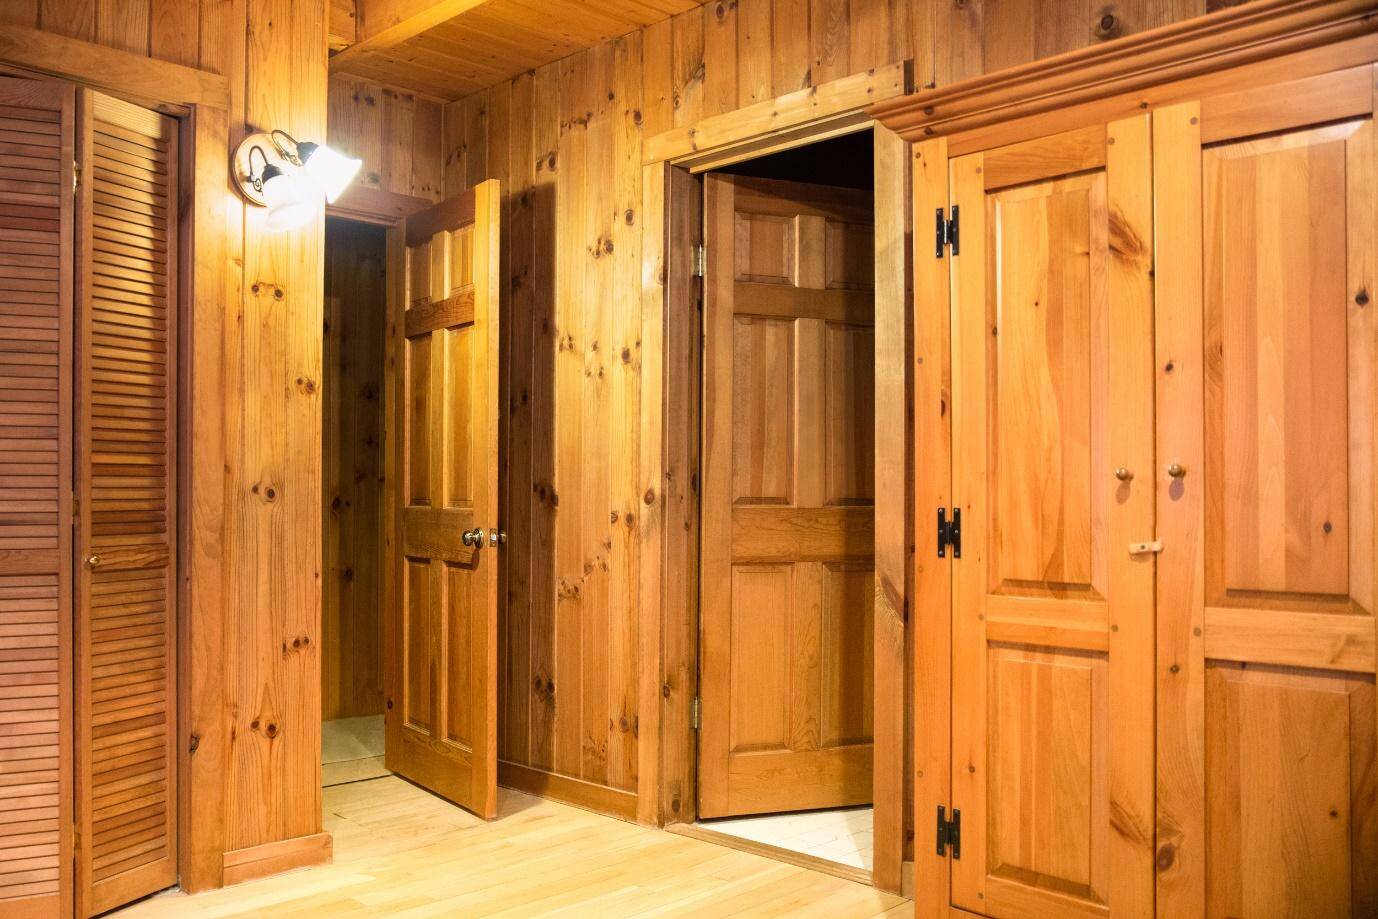 hallway with knotty pine on walls, ceiling, and doors